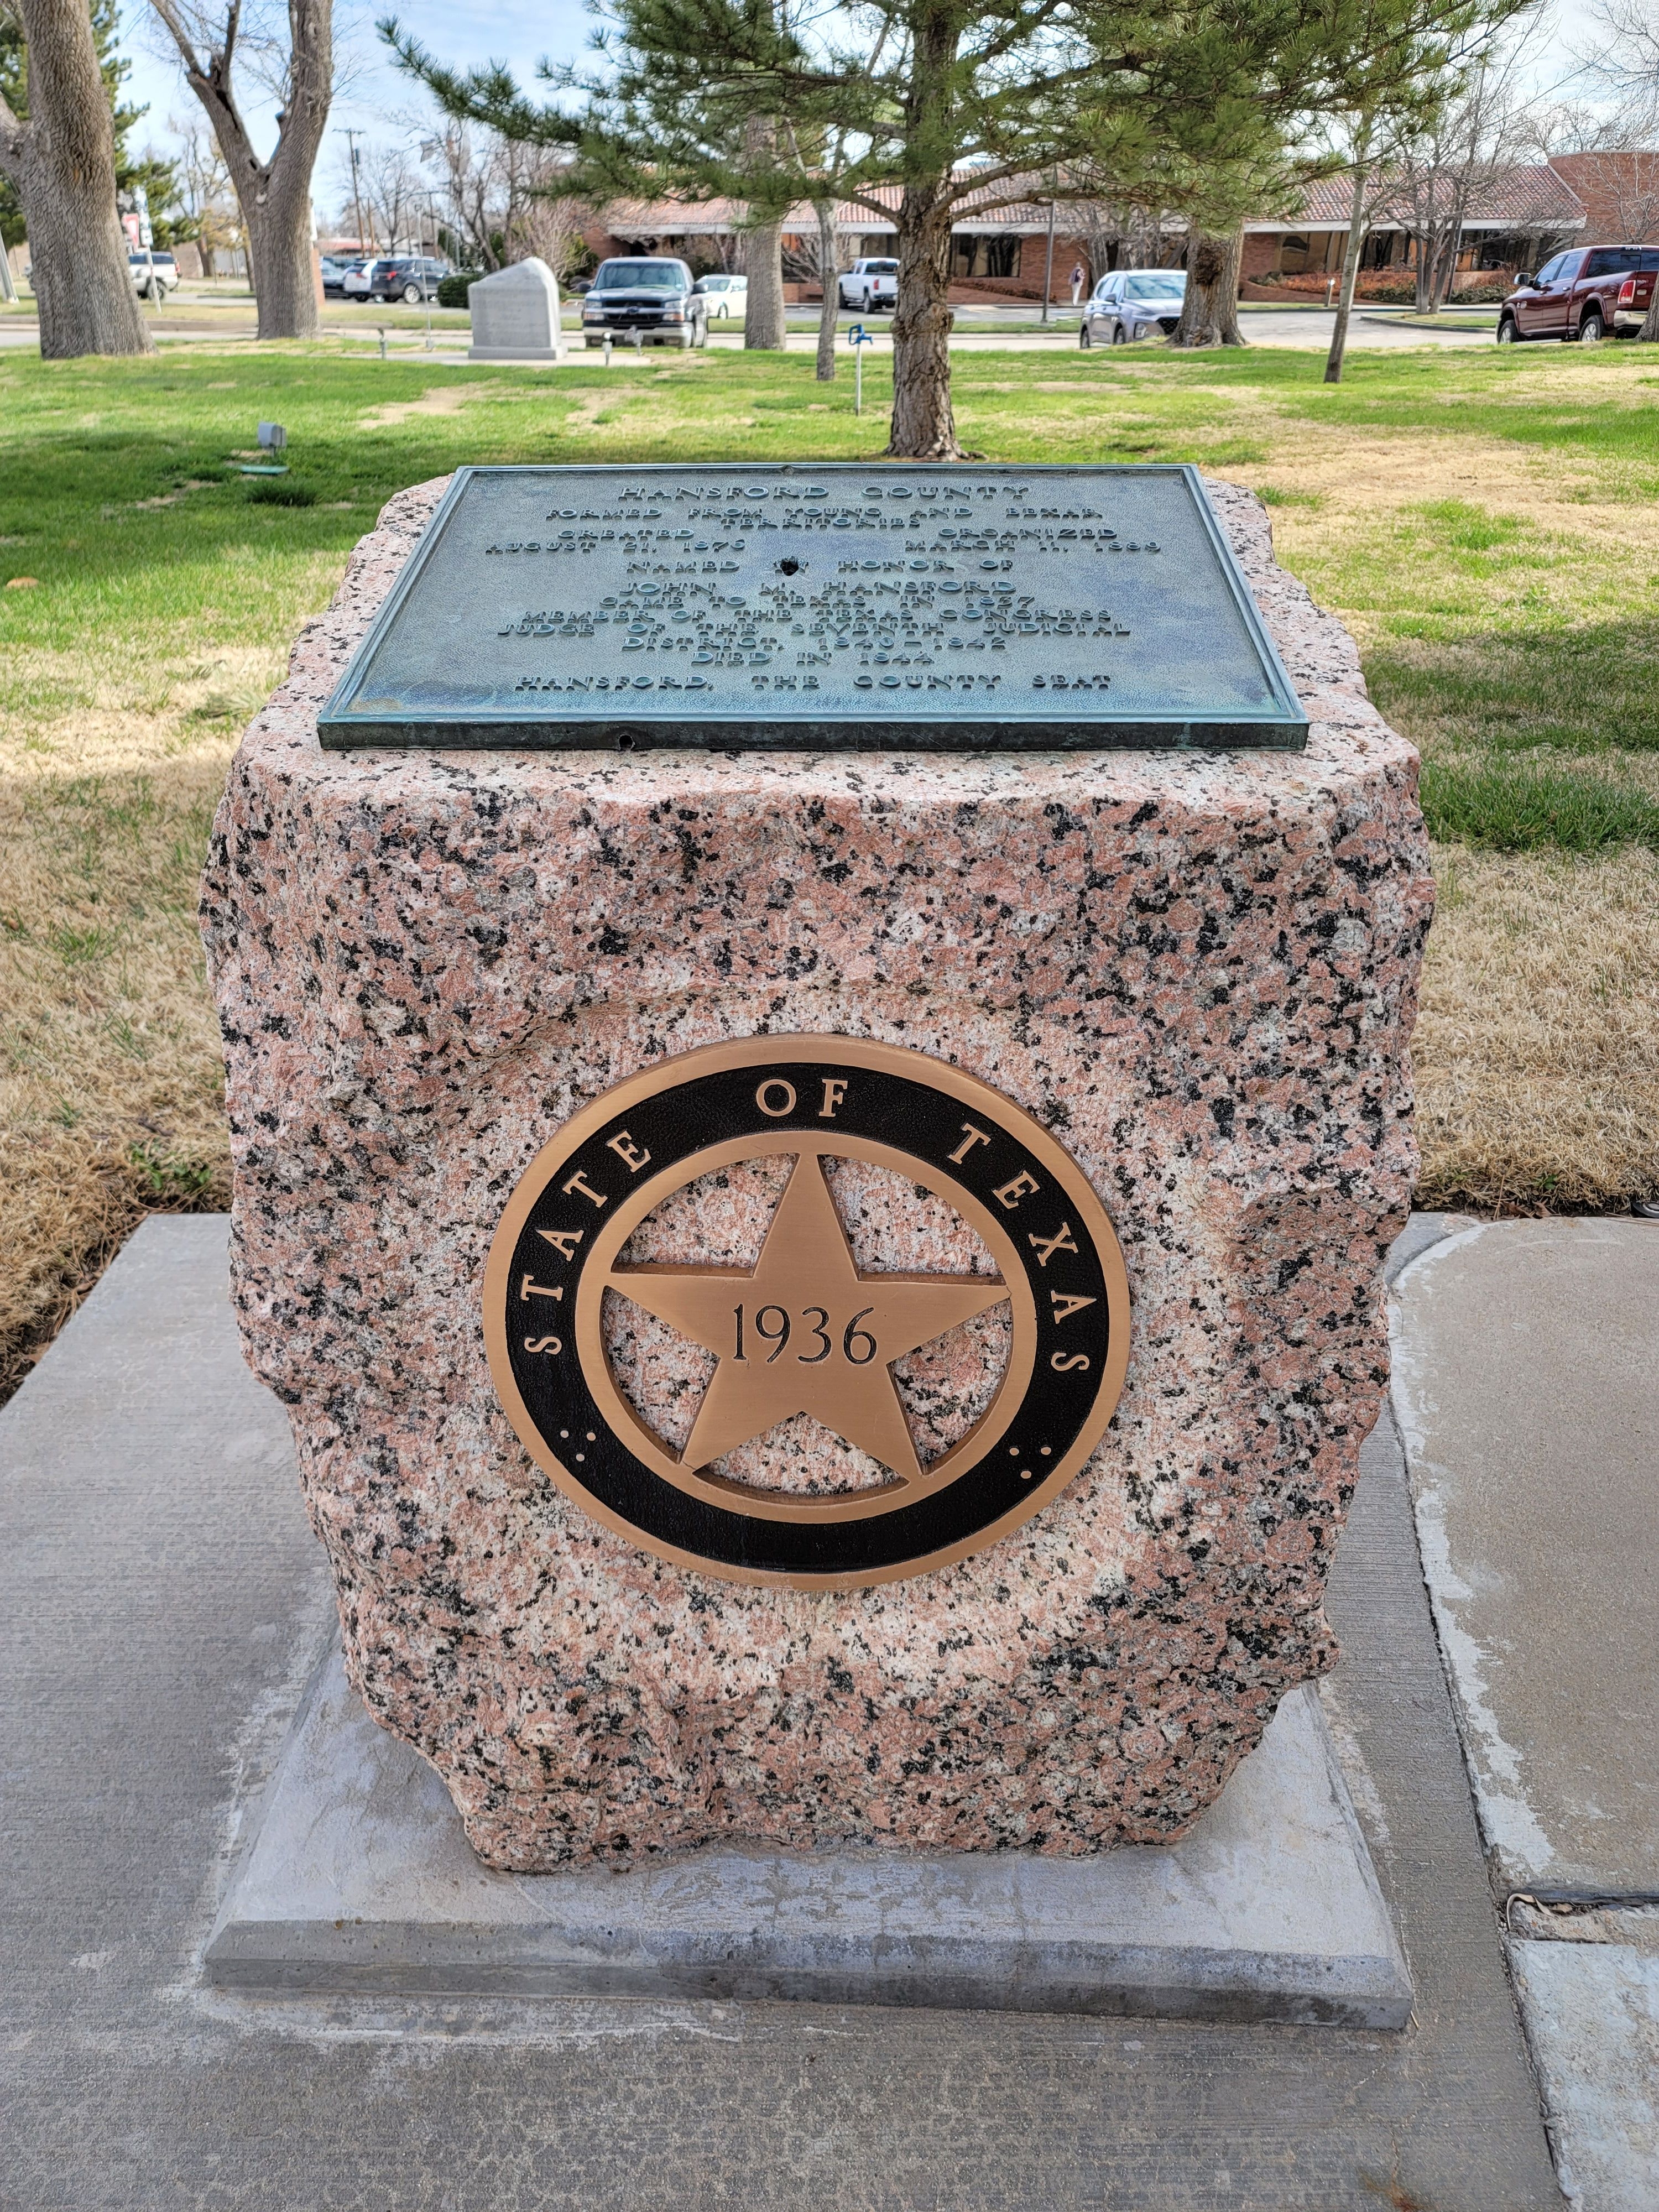 Hansford County Marker near the courthouse